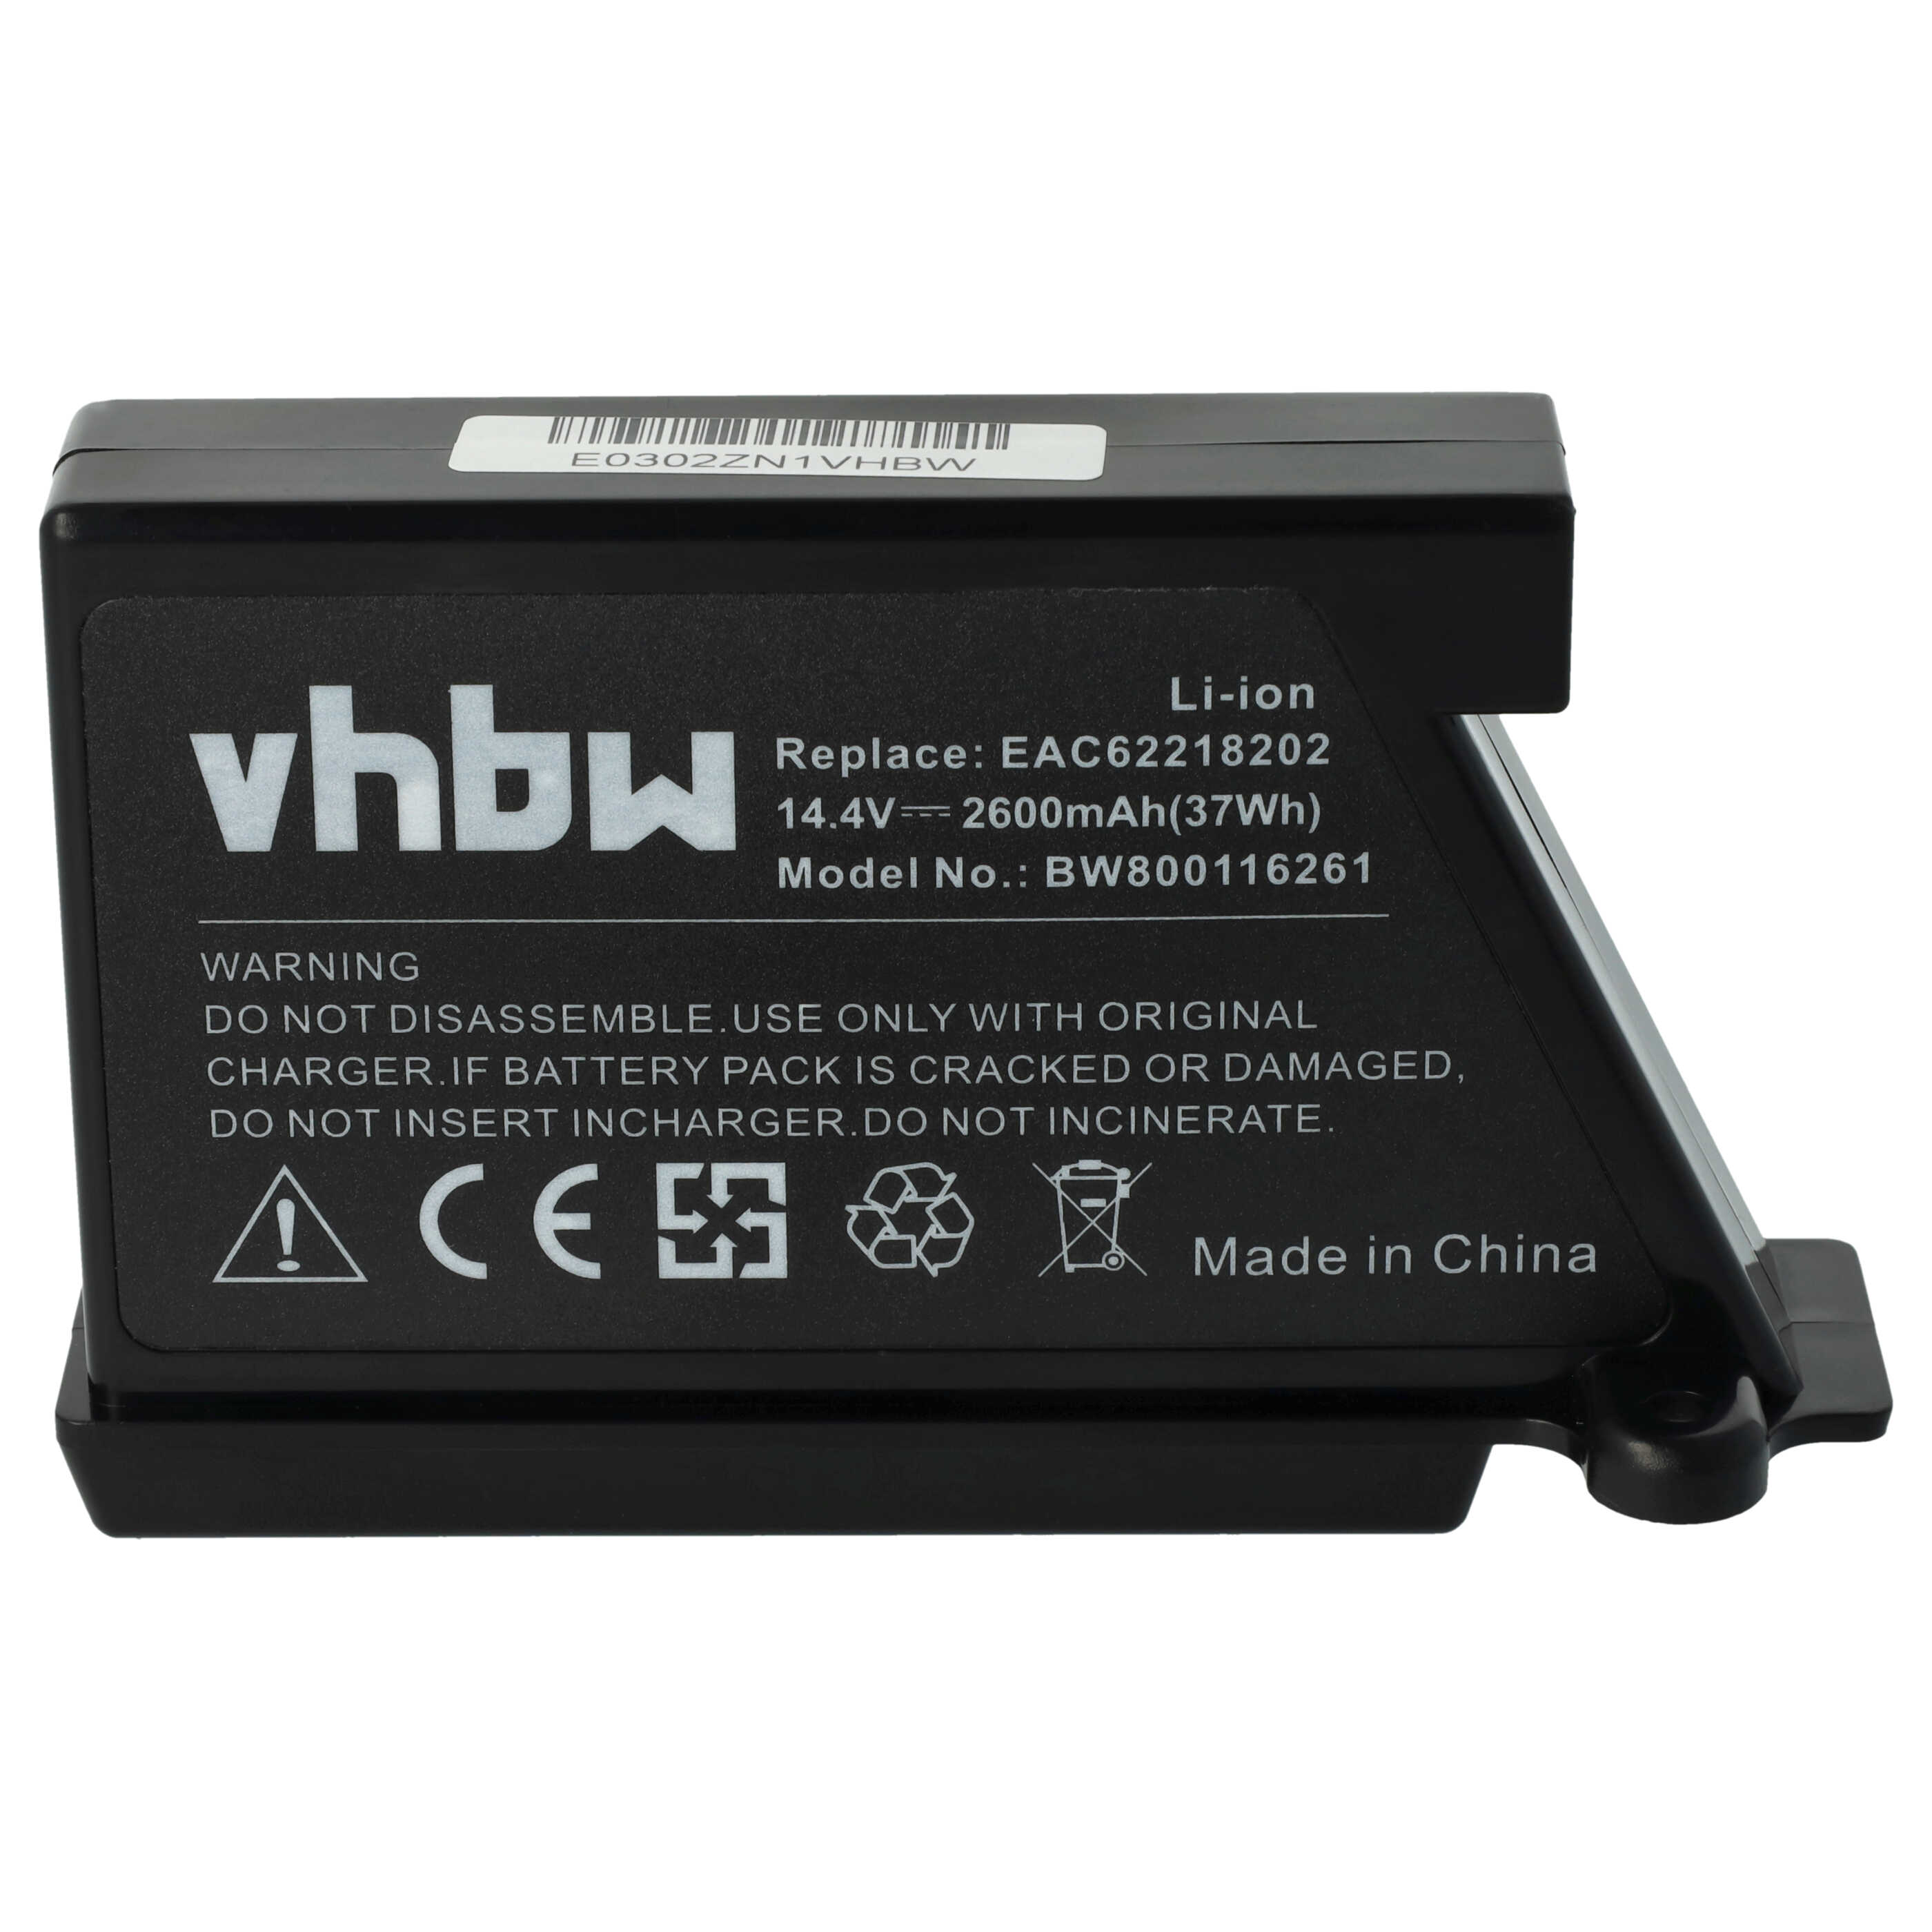 Battery Replacement for LG BRL1, EAC60766102, EAC60766101, EAC60766103 for - 2600mAh, 14.4V, Li-Ion